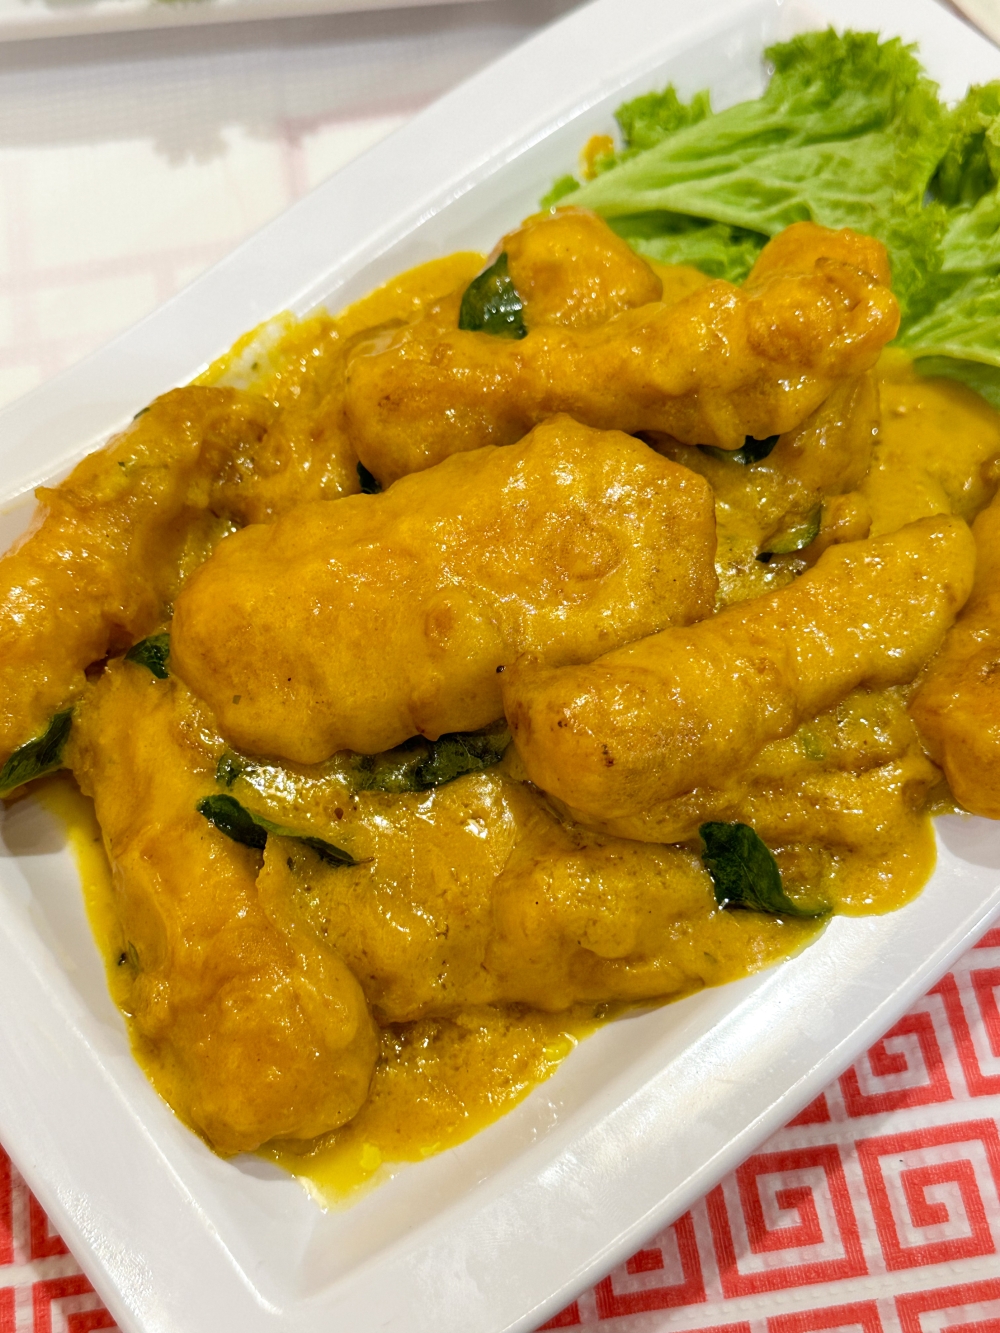 Pumpkin Tofu is best with rice as the smooth, silky beancurd is coated with a rich, not too sweet sauce.